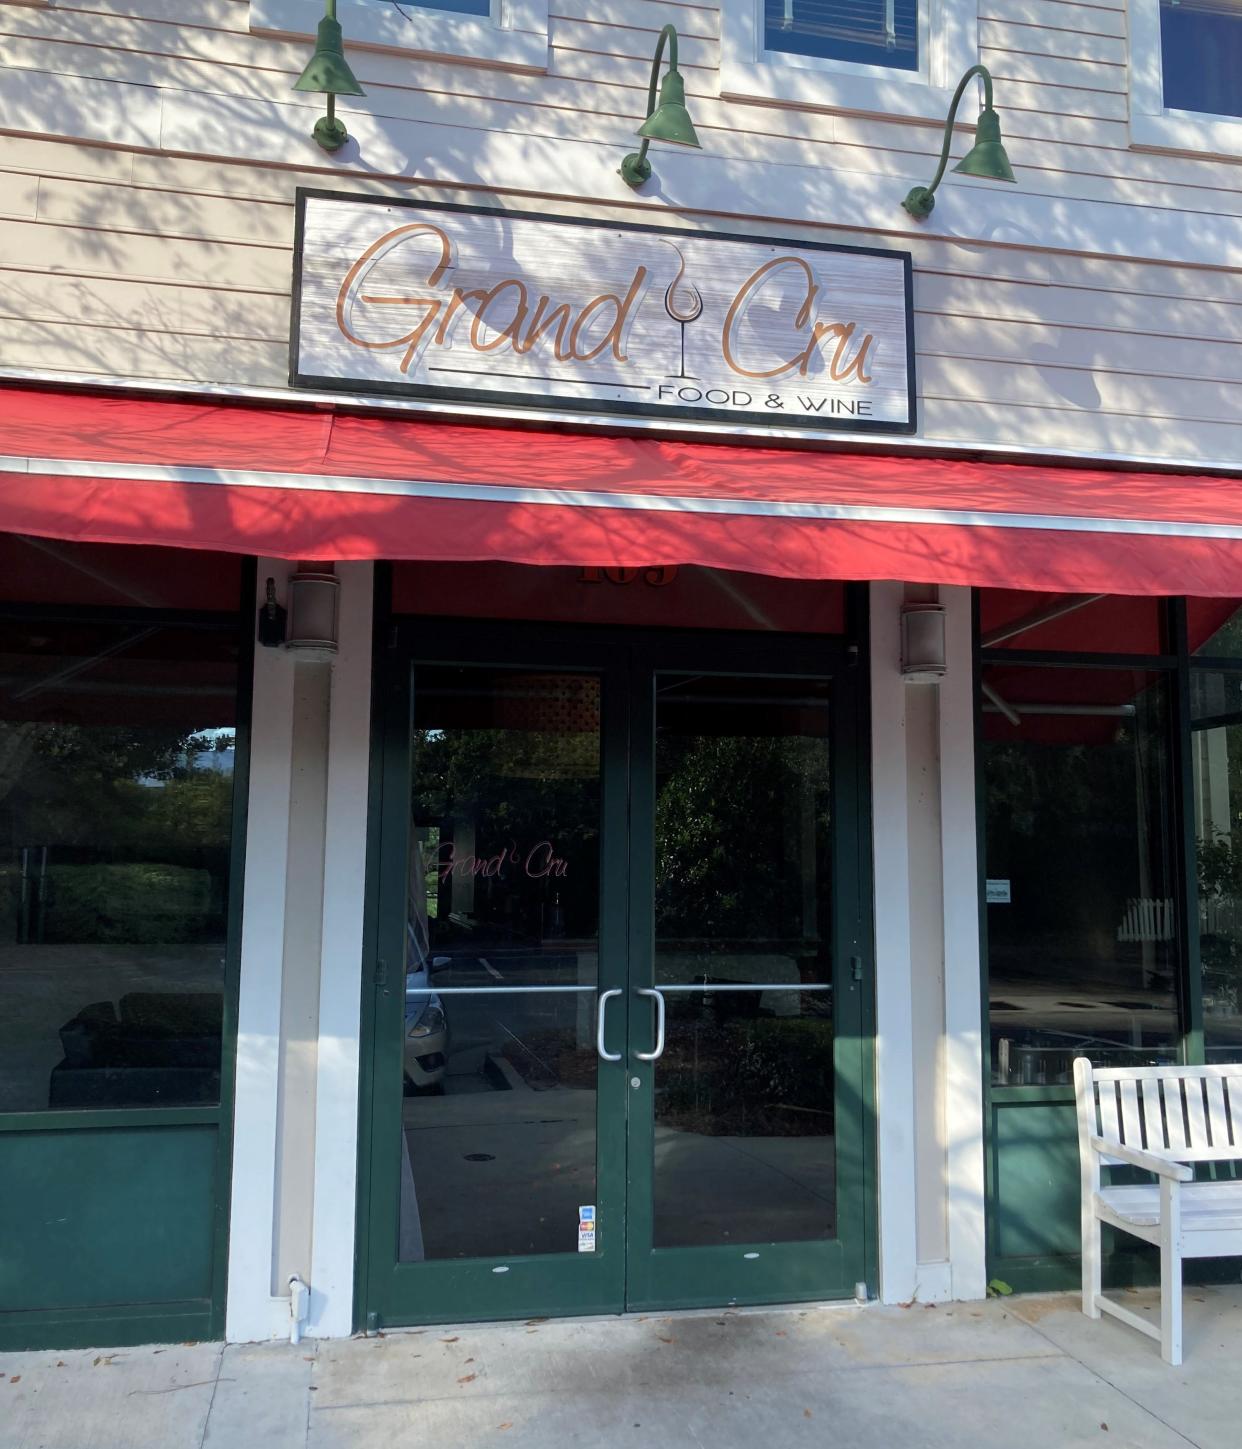 Grand Cru Food & Wine is closed as of September 2023 in Lumina Station.